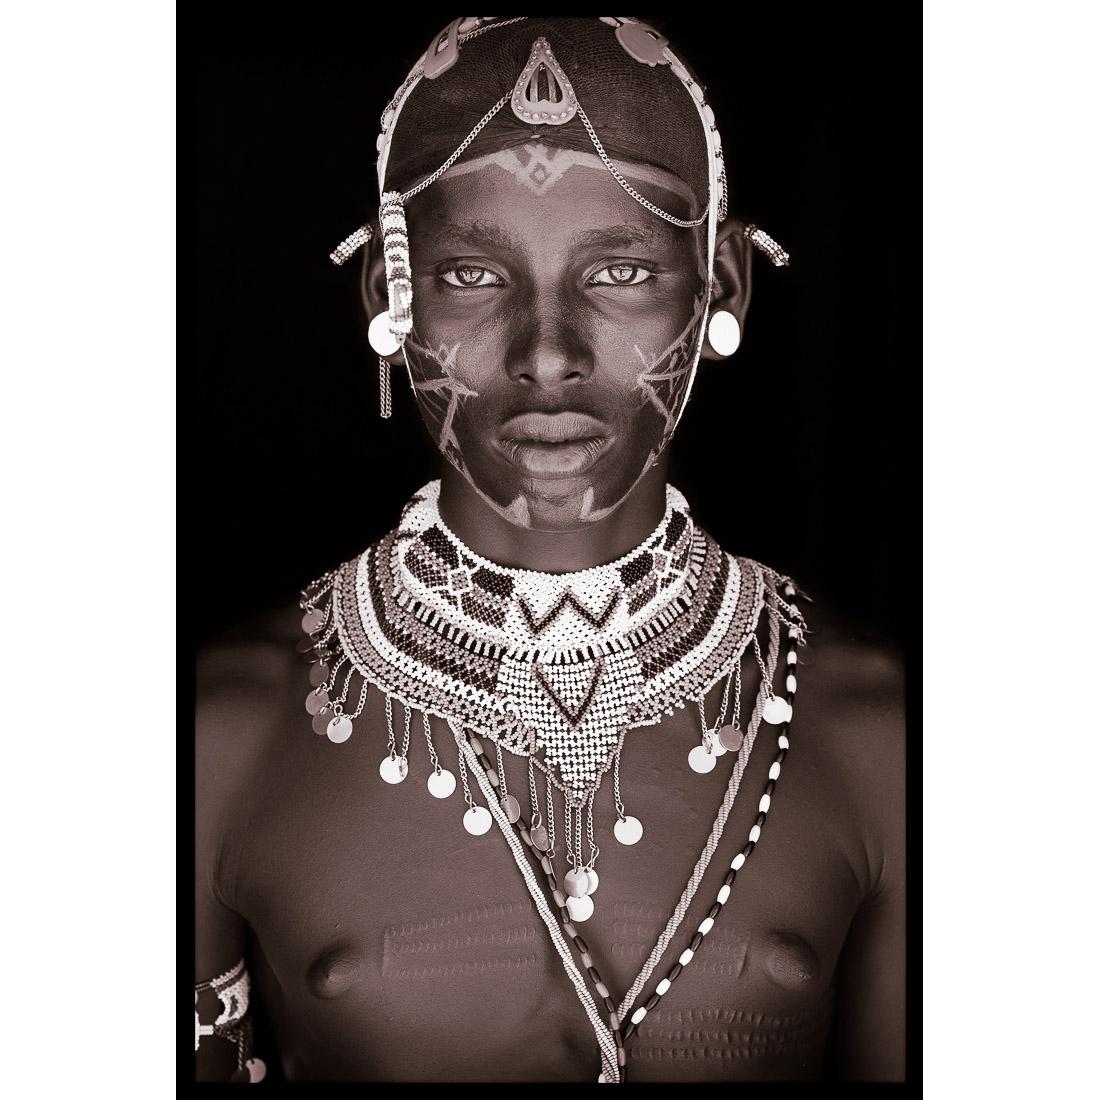 A portrait of Lekutano, a Samburu man from northern Kenya in 2019.

John Kenny’s work is all shot on location in some of the remotest corners of Africa. His images are all taken with natural light and his subjects in their day to day attire.

The